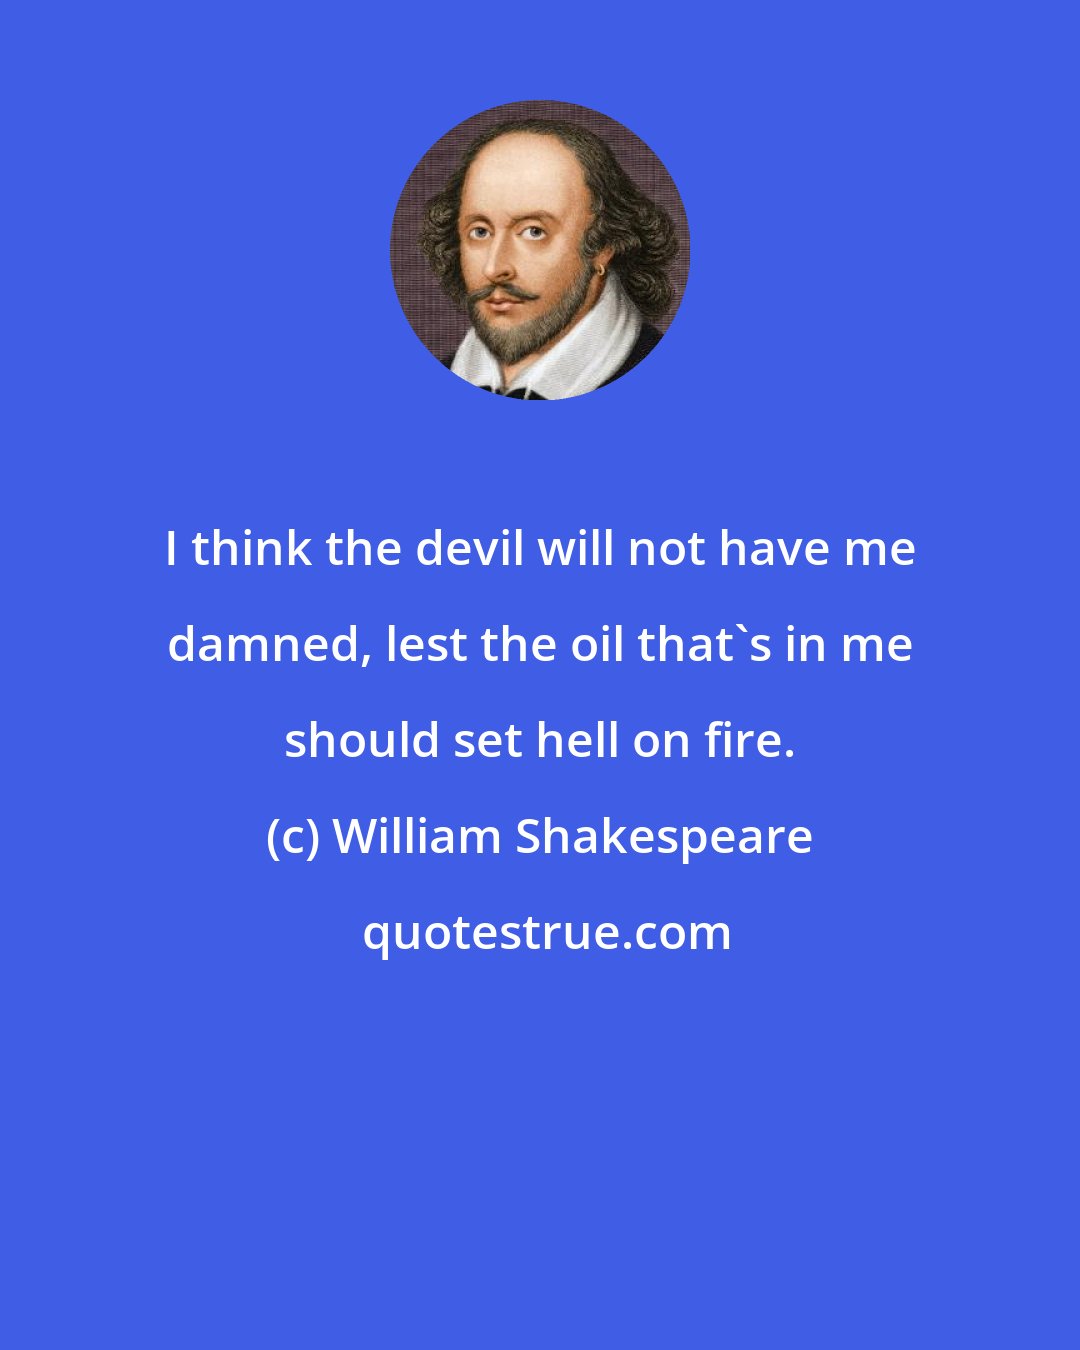 William Shakespeare: I think the devil will not have me damned, lest the oil that's in me should set hell on fire.